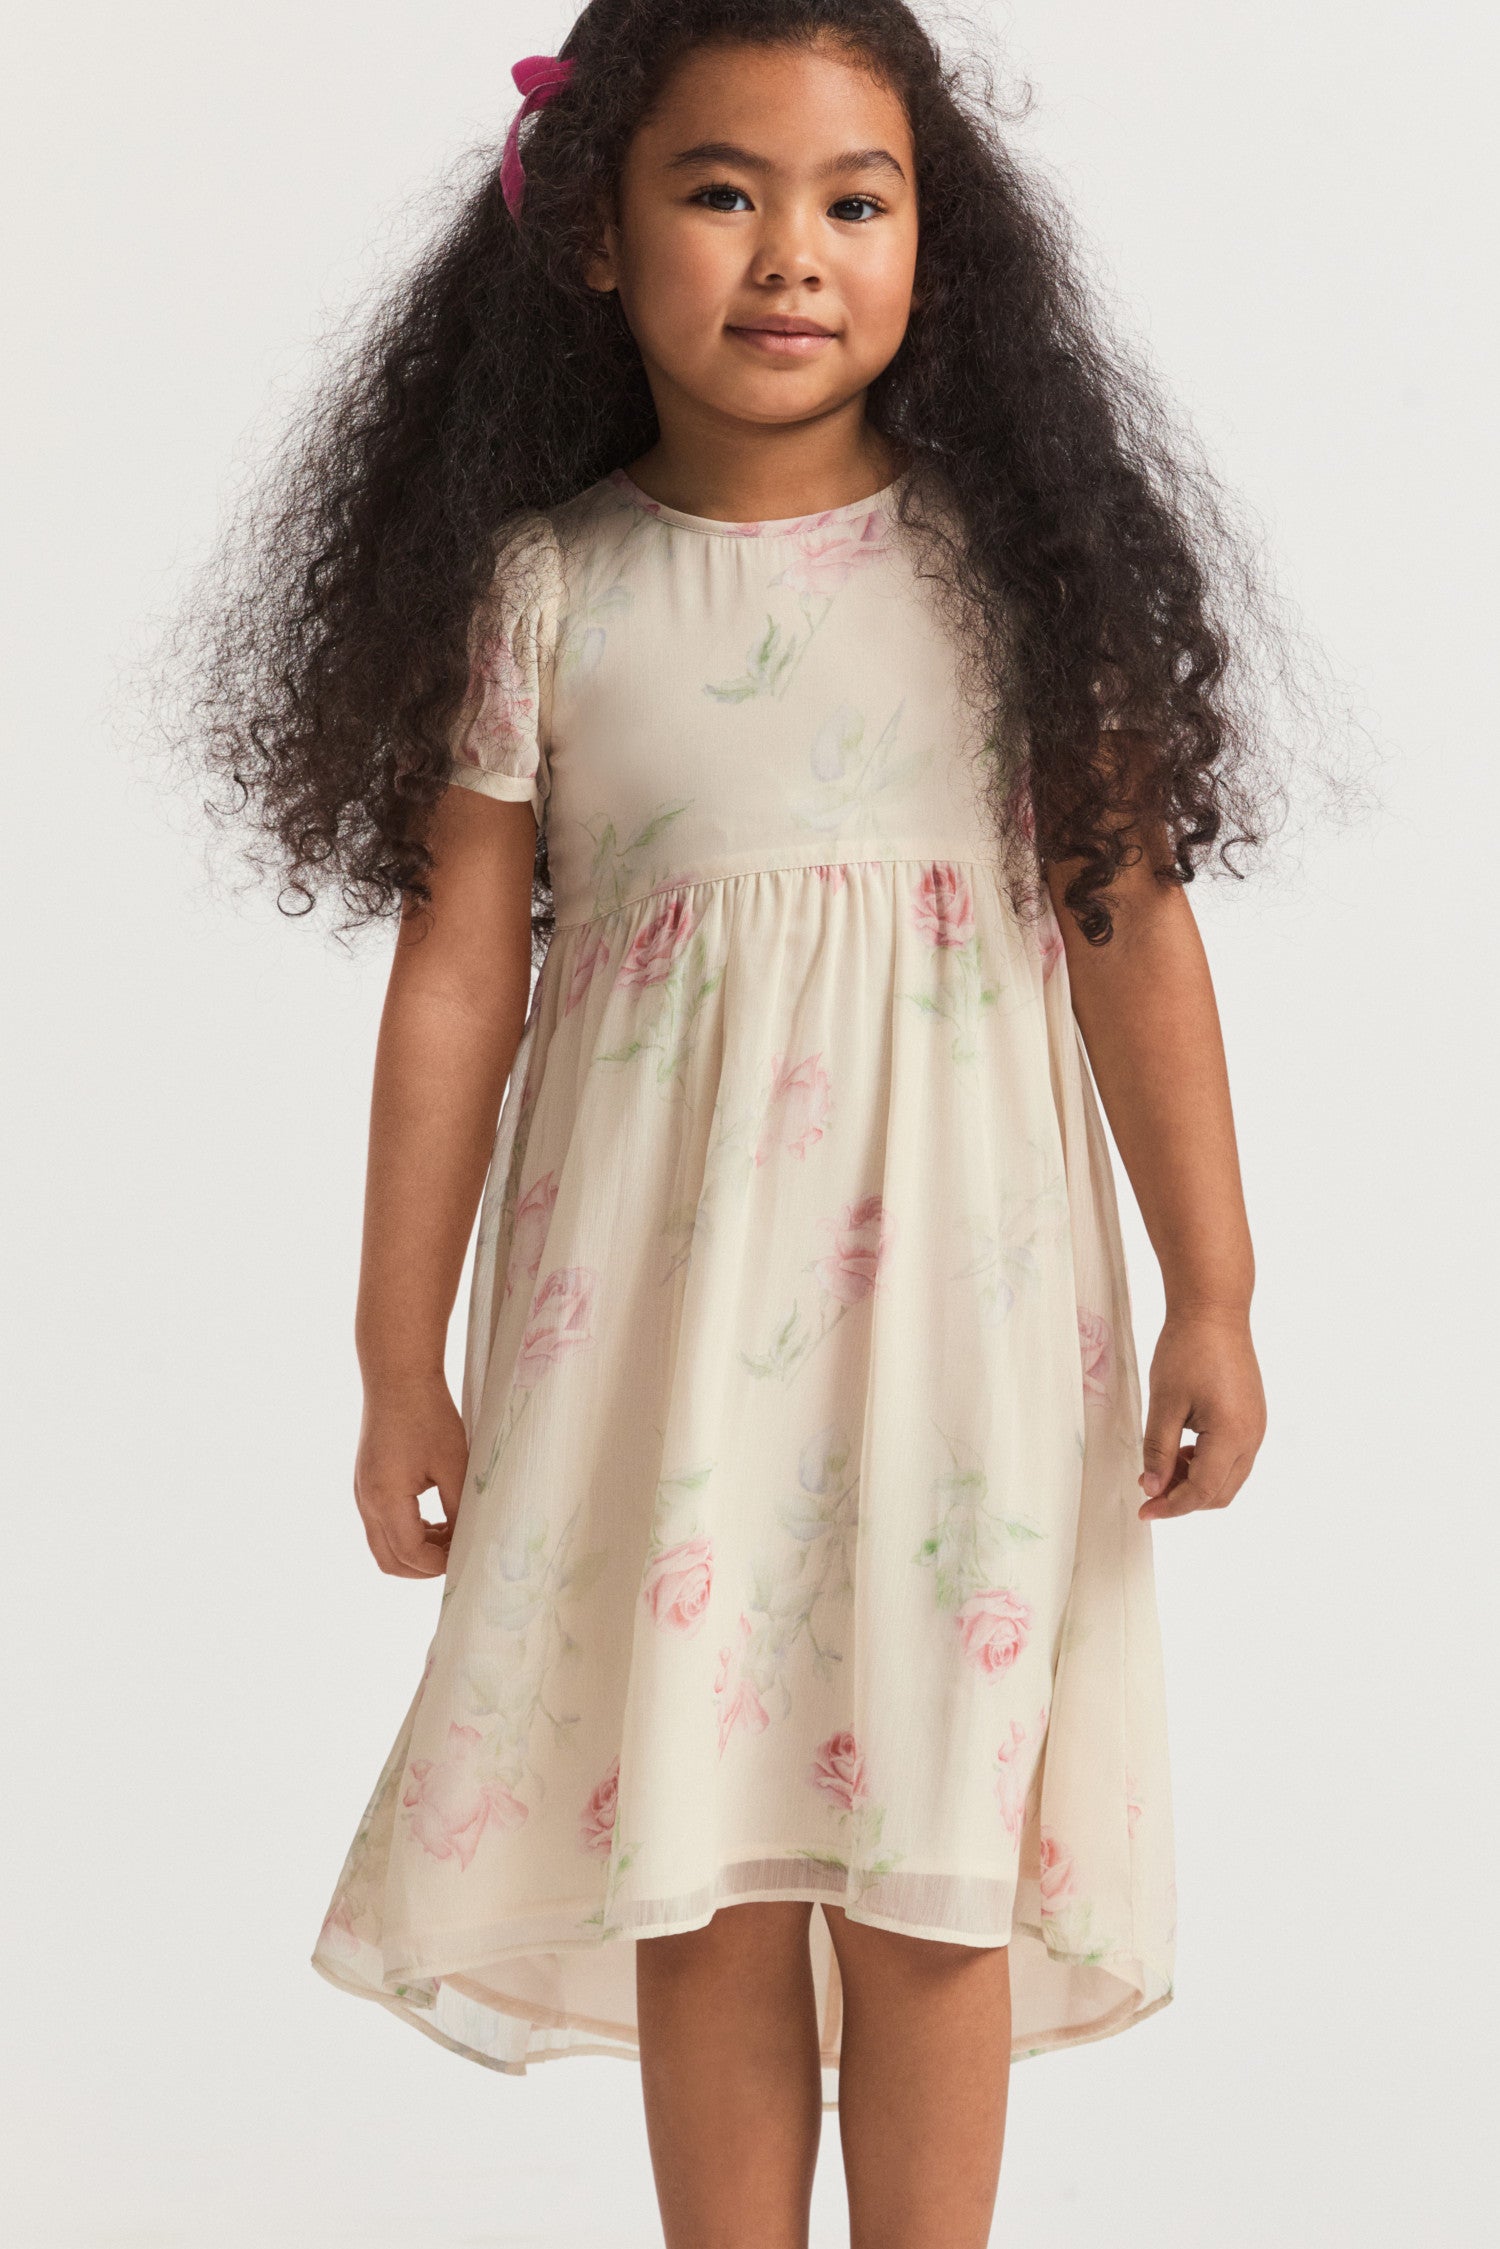 Girls cream floral dress, with sheer puffed sleeves and an empire waist lets down into a full tea-length skirt. Side seam mesh ties extend from the waist to a spirited bow at the back for a sweet touch. Center back button closure.